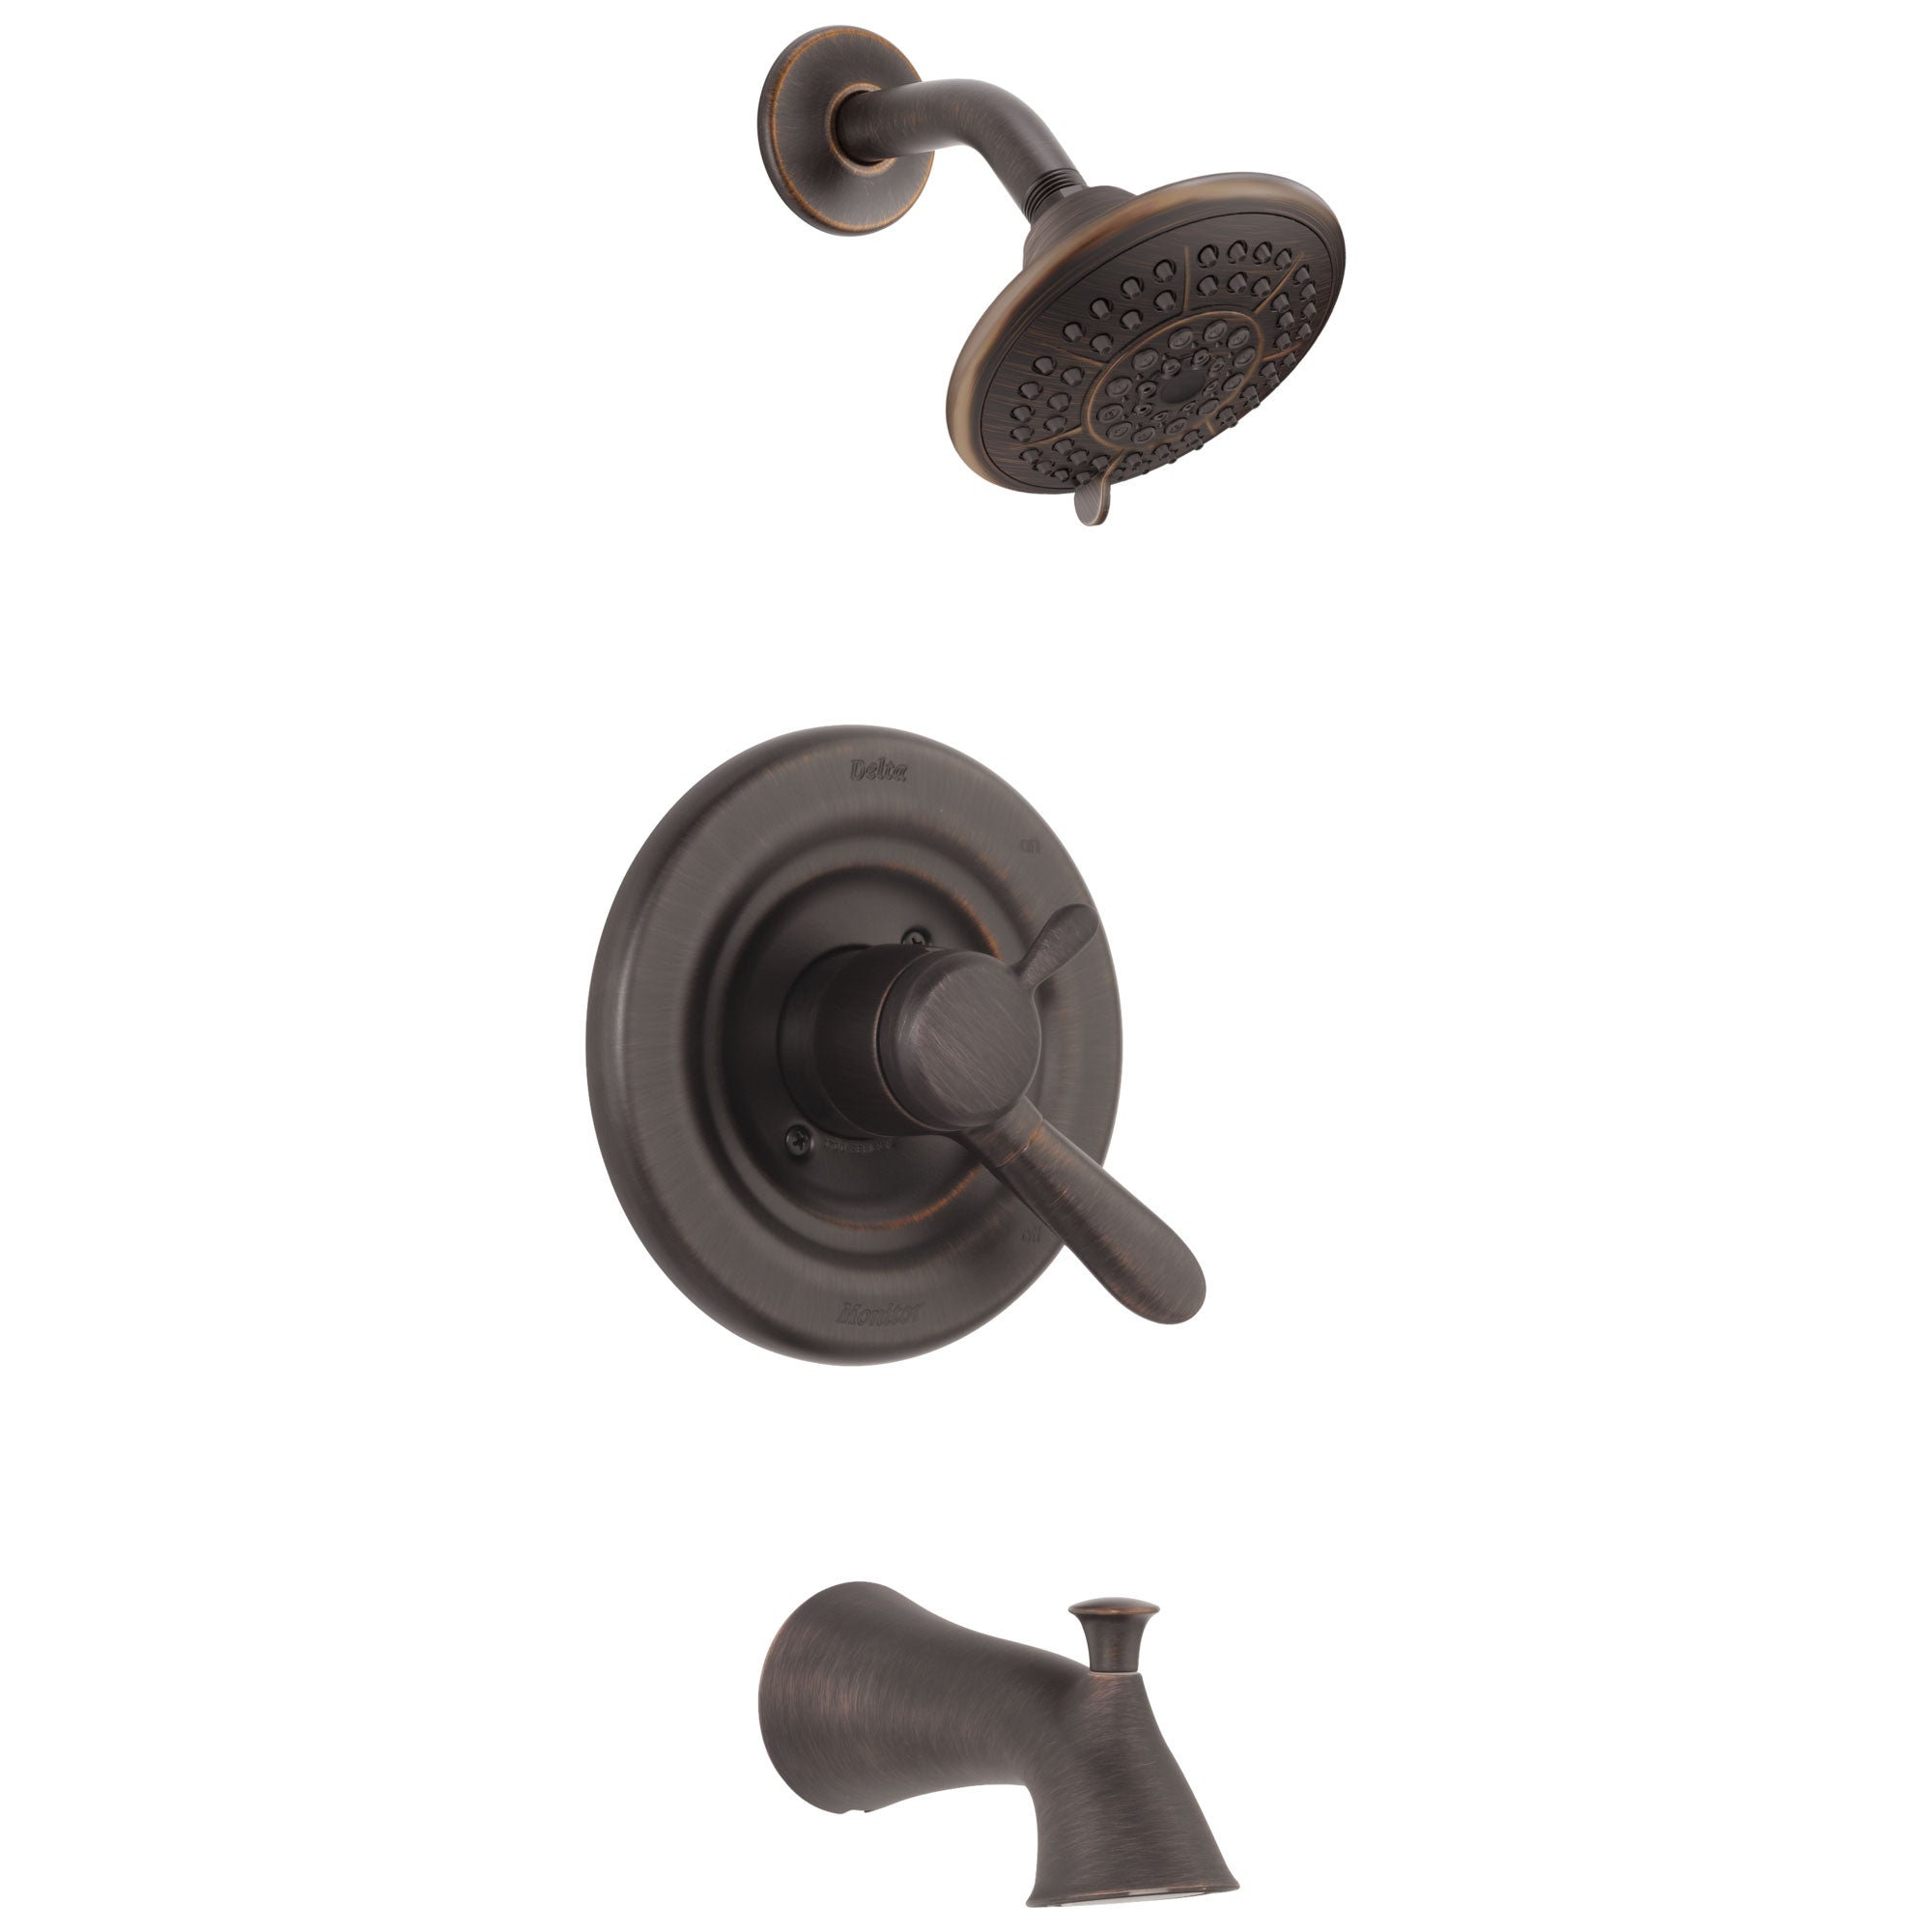 Delta Lahara Temp/Volume Venetian Bronze Tub and Shower Faucet with Valve D435V